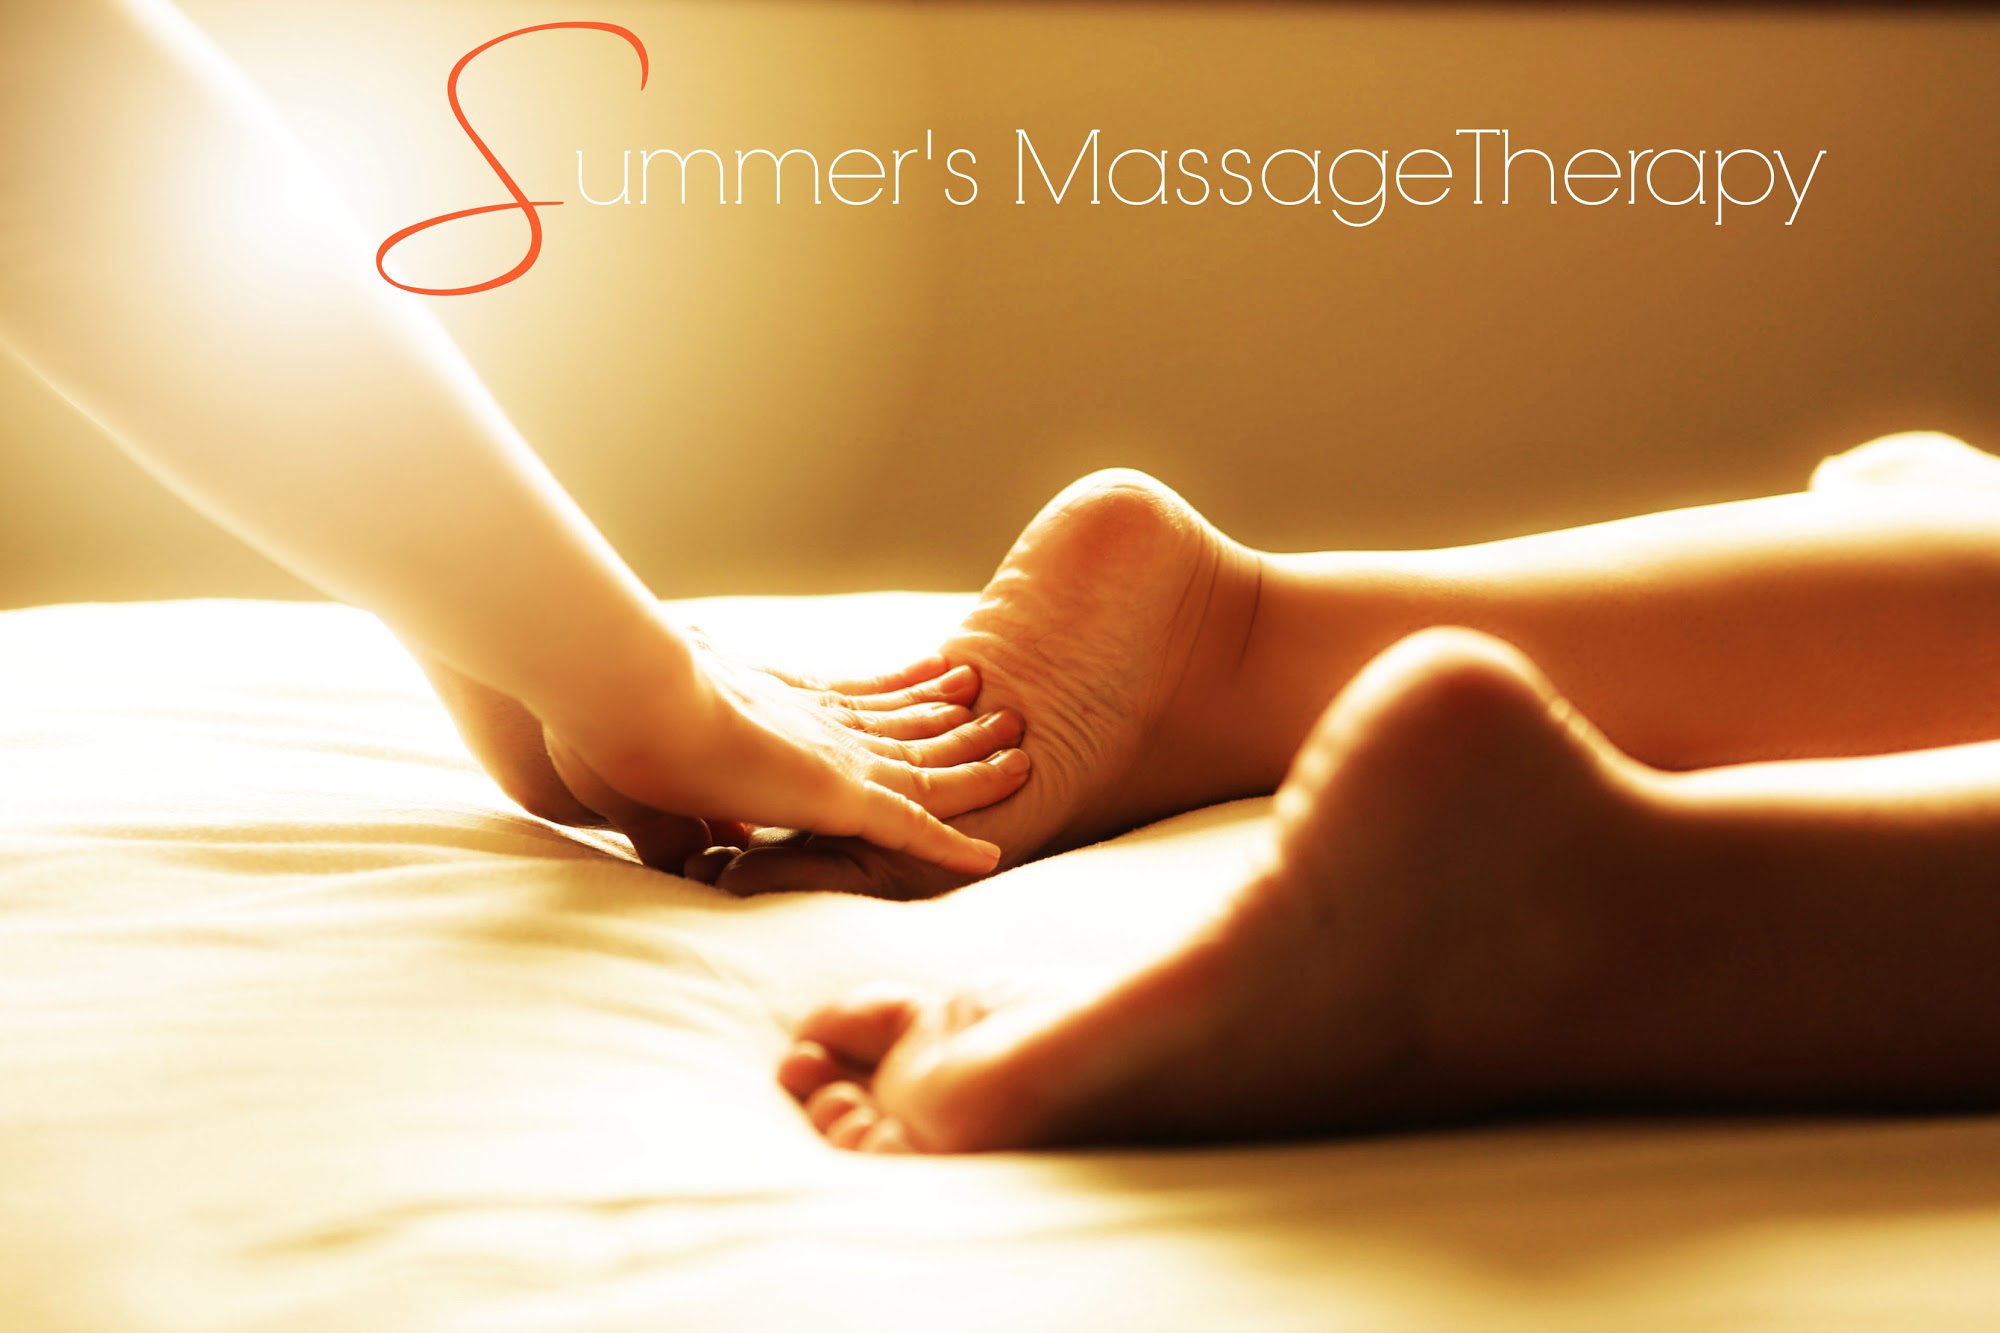 Summer's Massage Therapy and pain relief